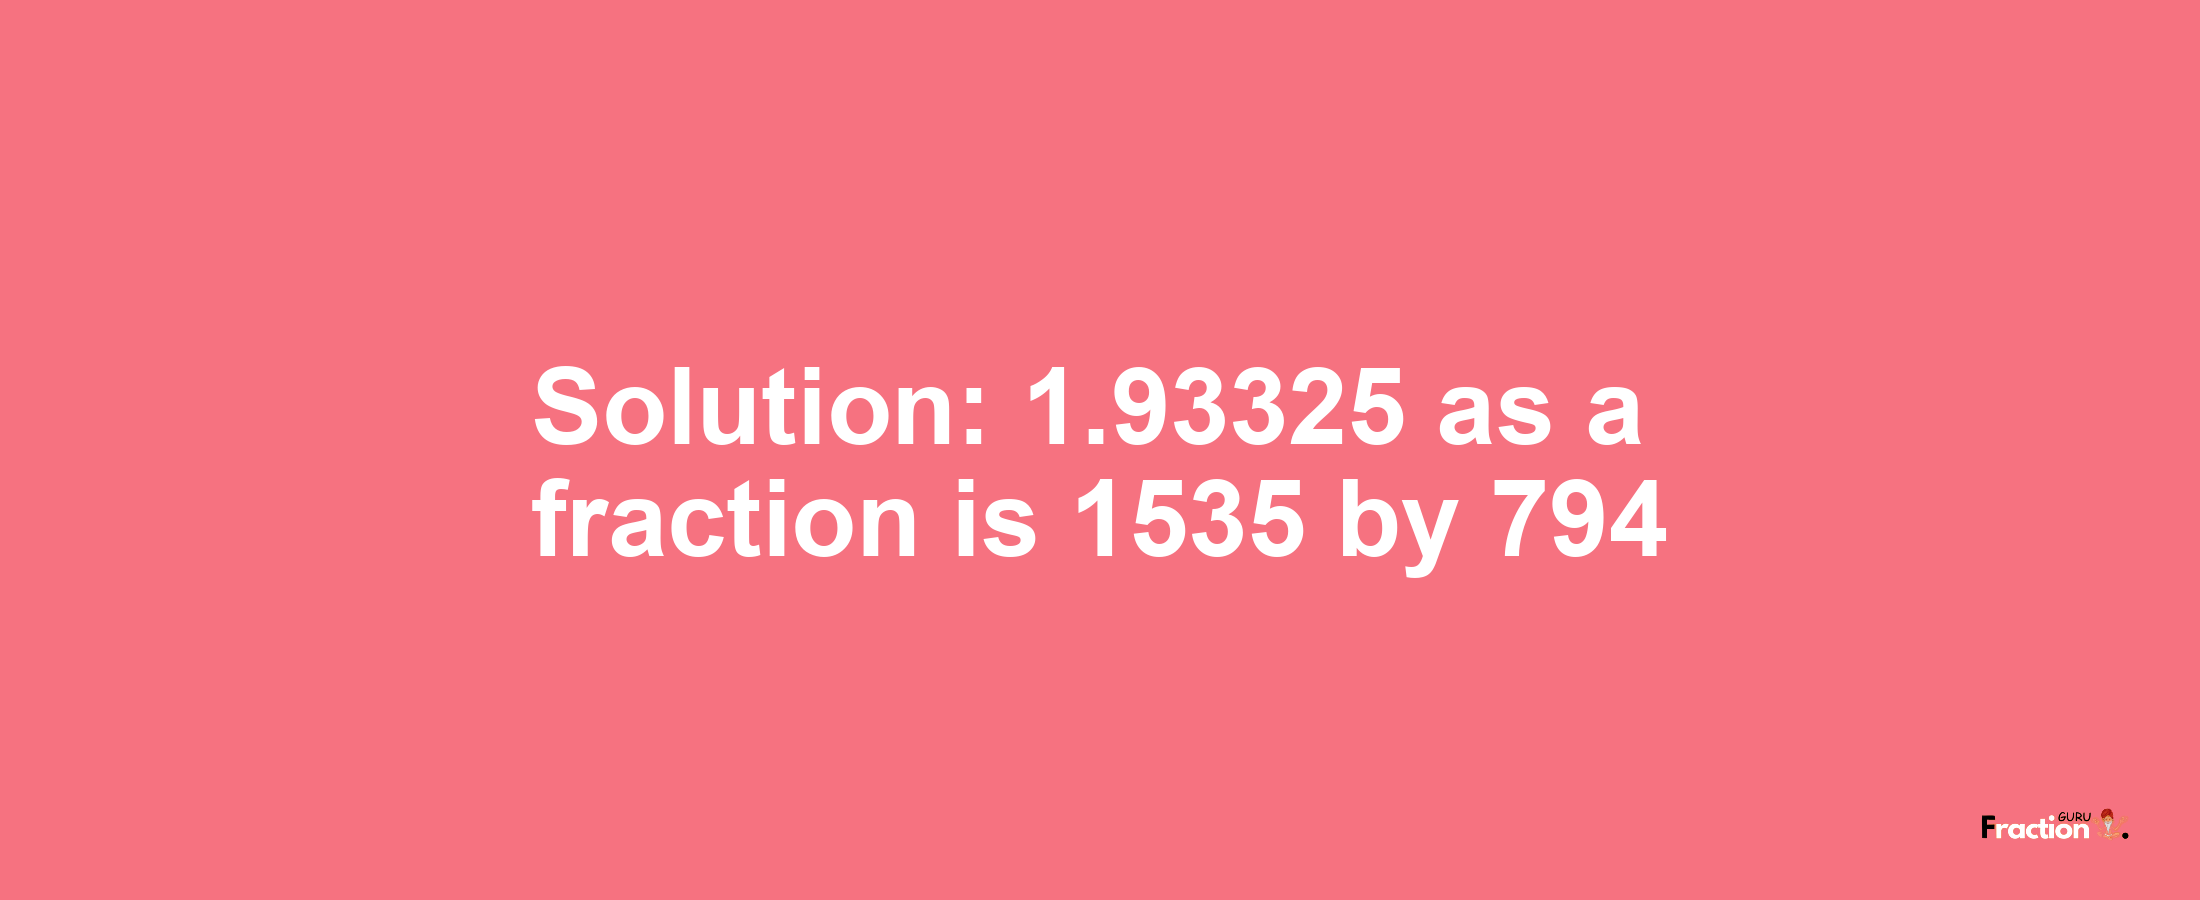 Solution:1.93325 as a fraction is 1535/794